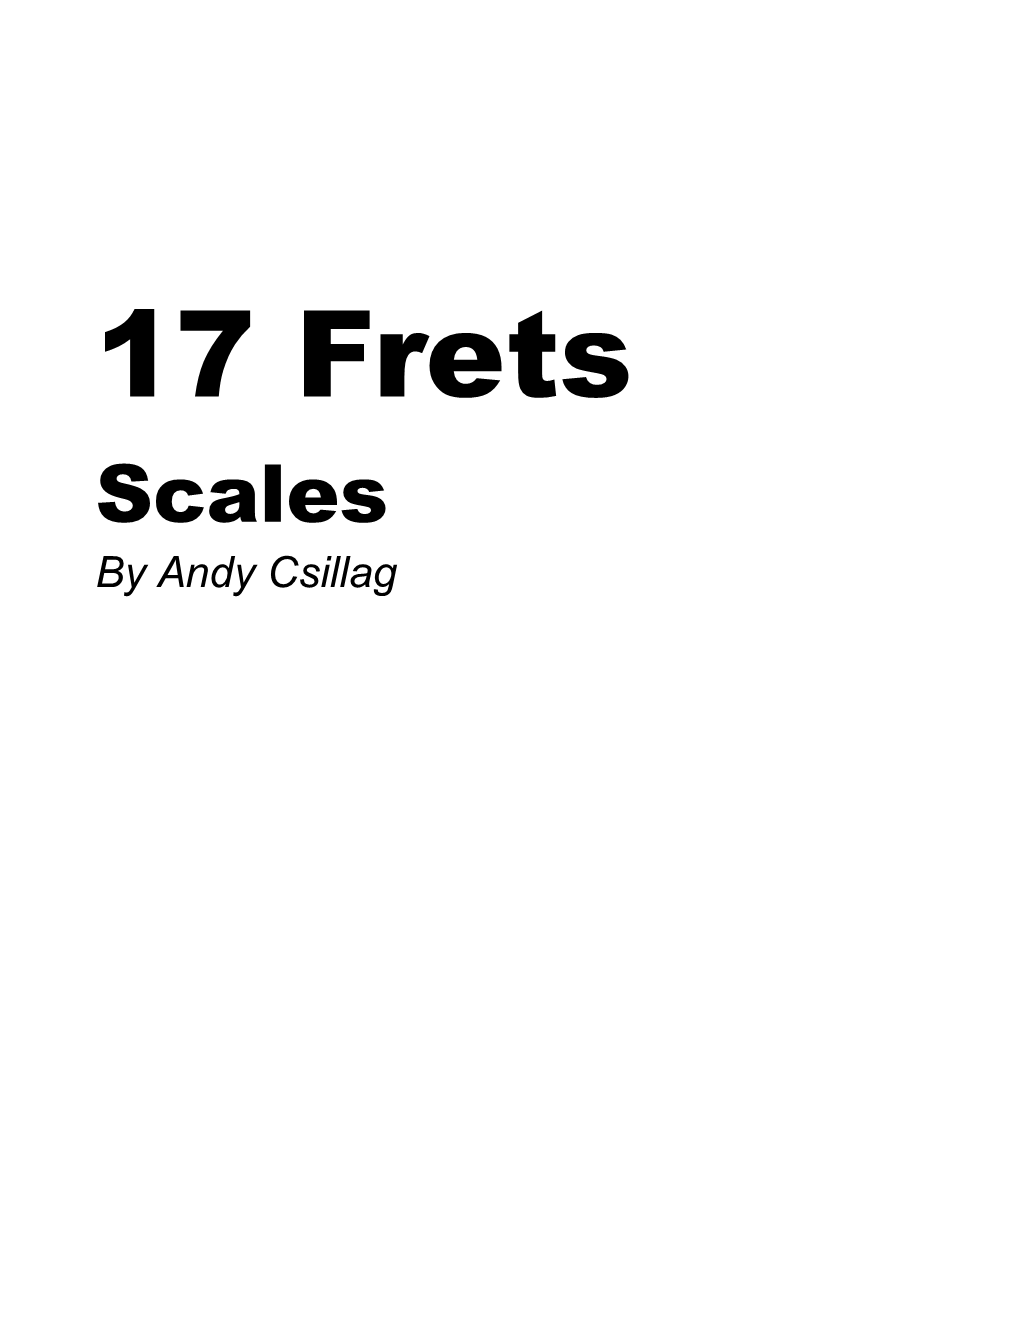 Scales by Andy Csillag